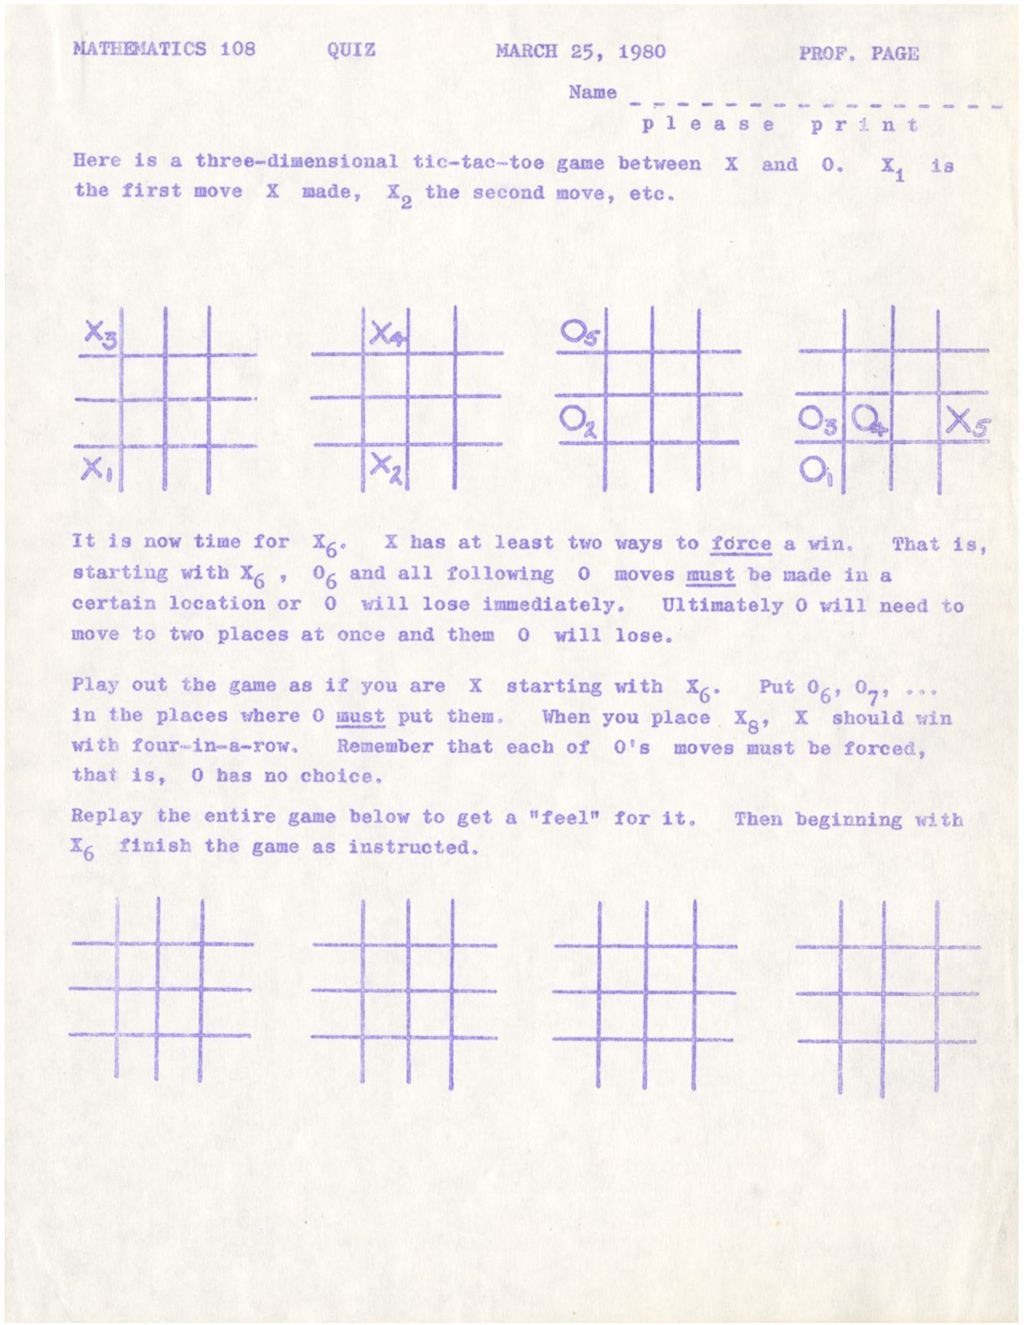 Mathematics 108 Quizzes from spring 1980